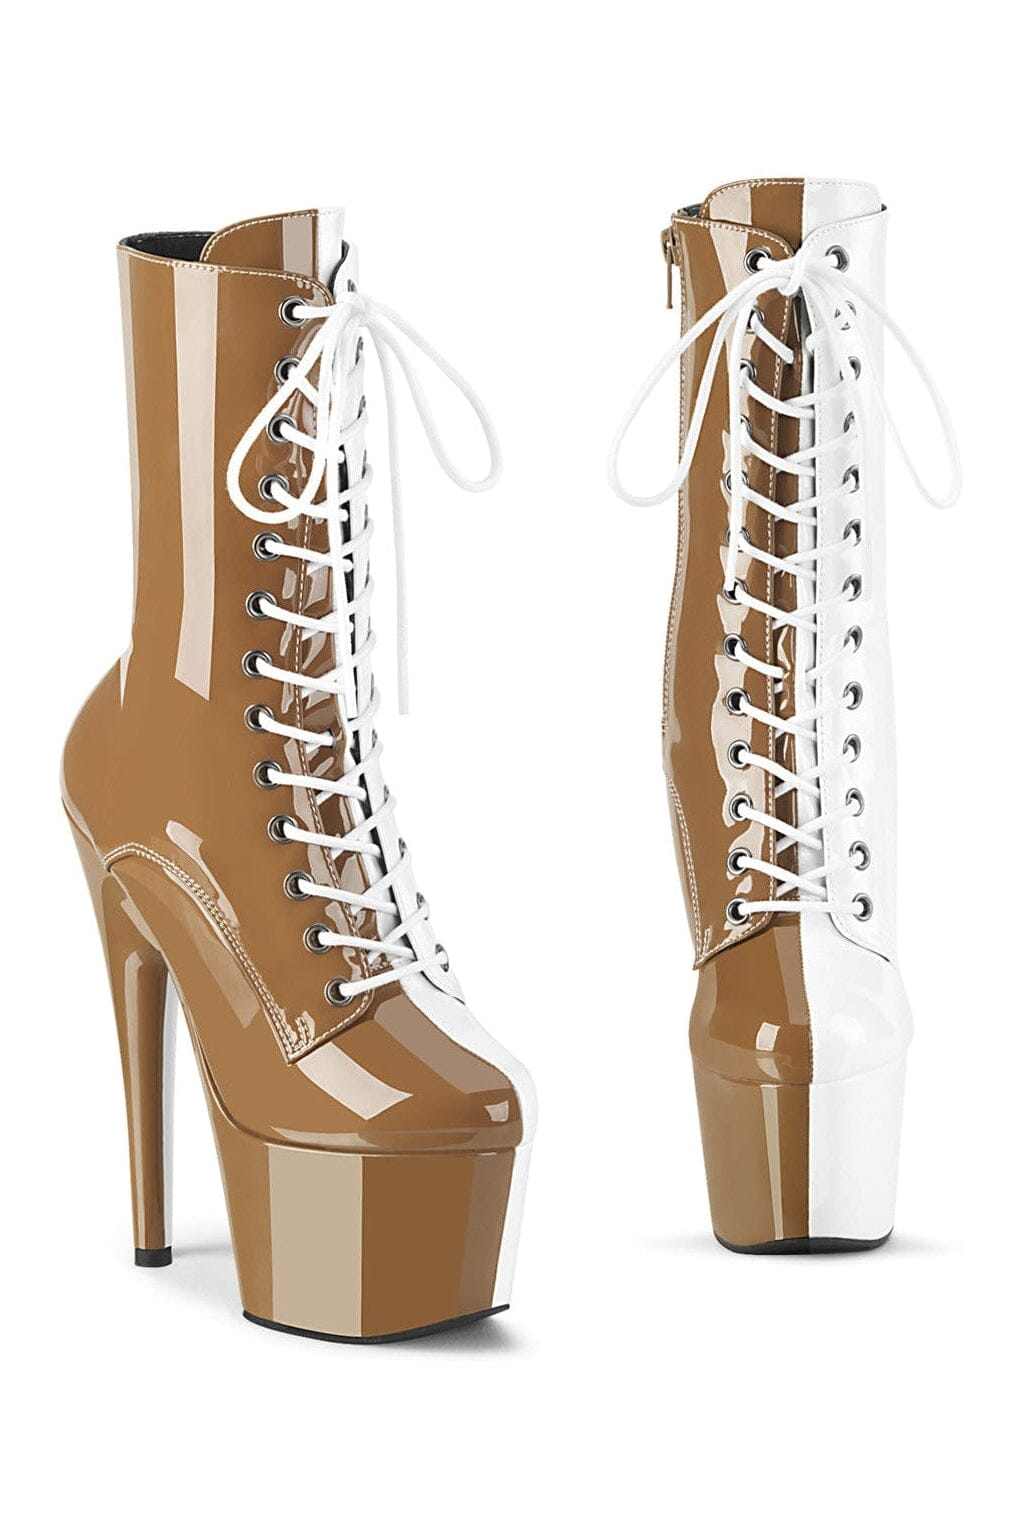 ADORE-1040TT Grey Patent Ankle Boot-Ankle Boots-Pleaser-Grey-10-Patent-SEXYSHOES.COM